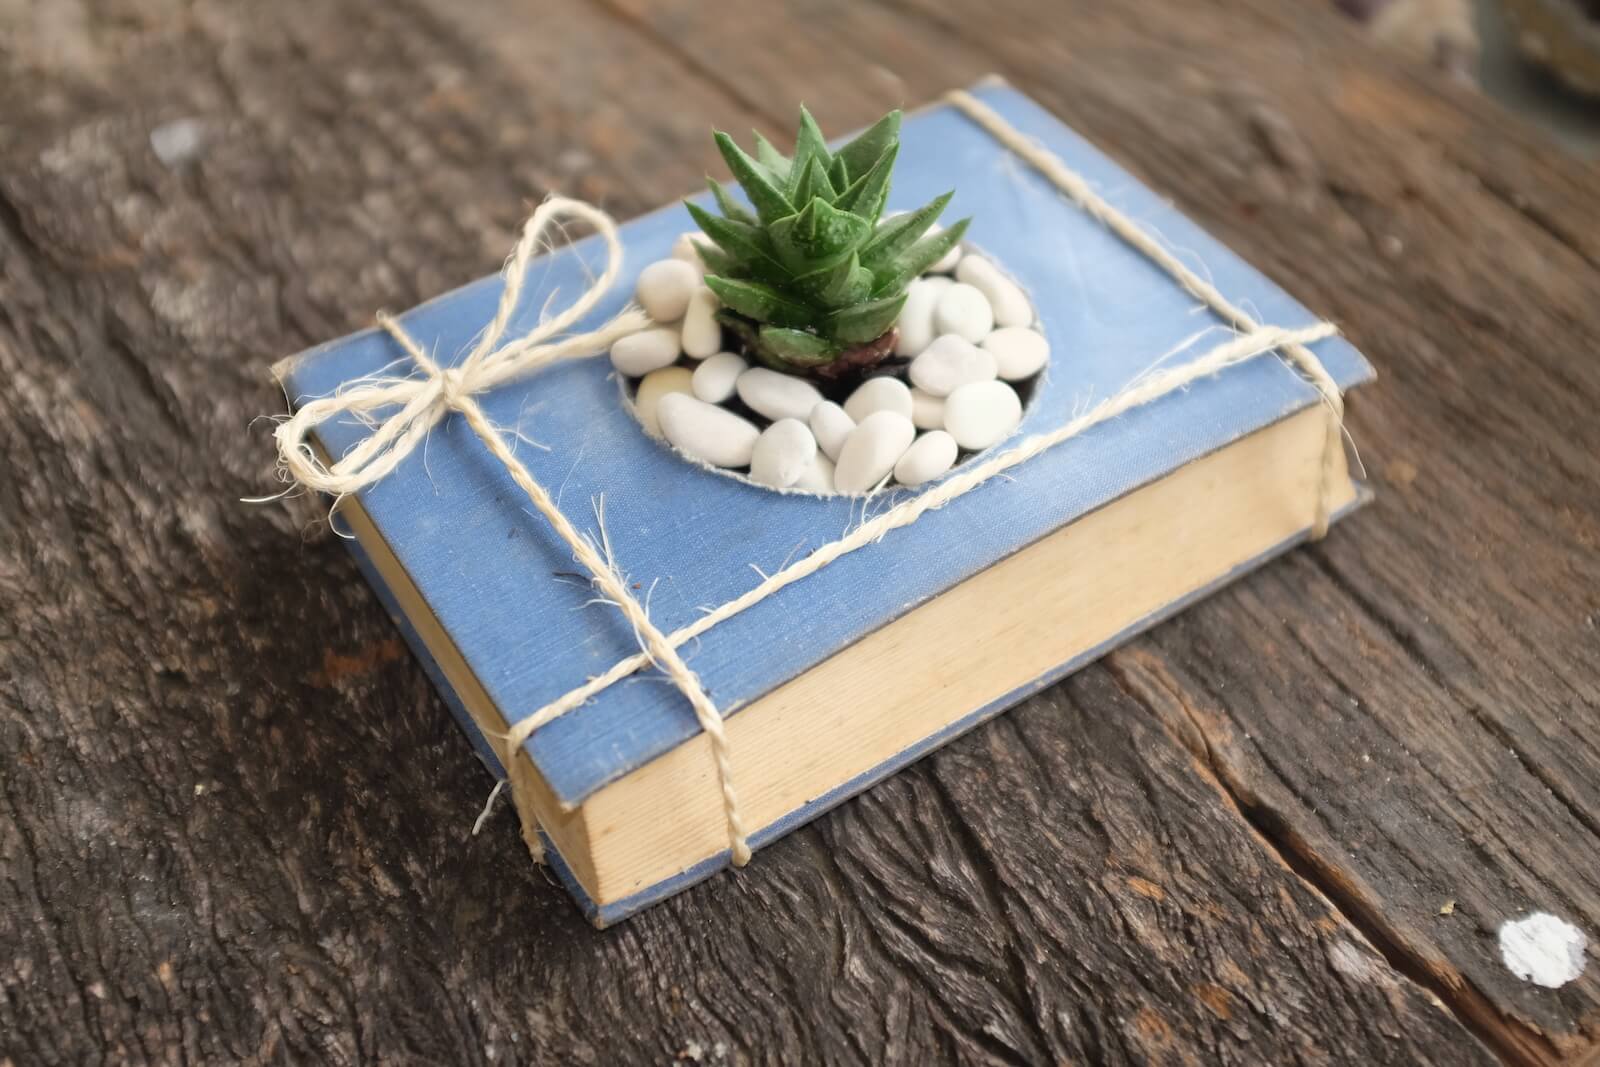 a completed succulent planter made from a vintage book